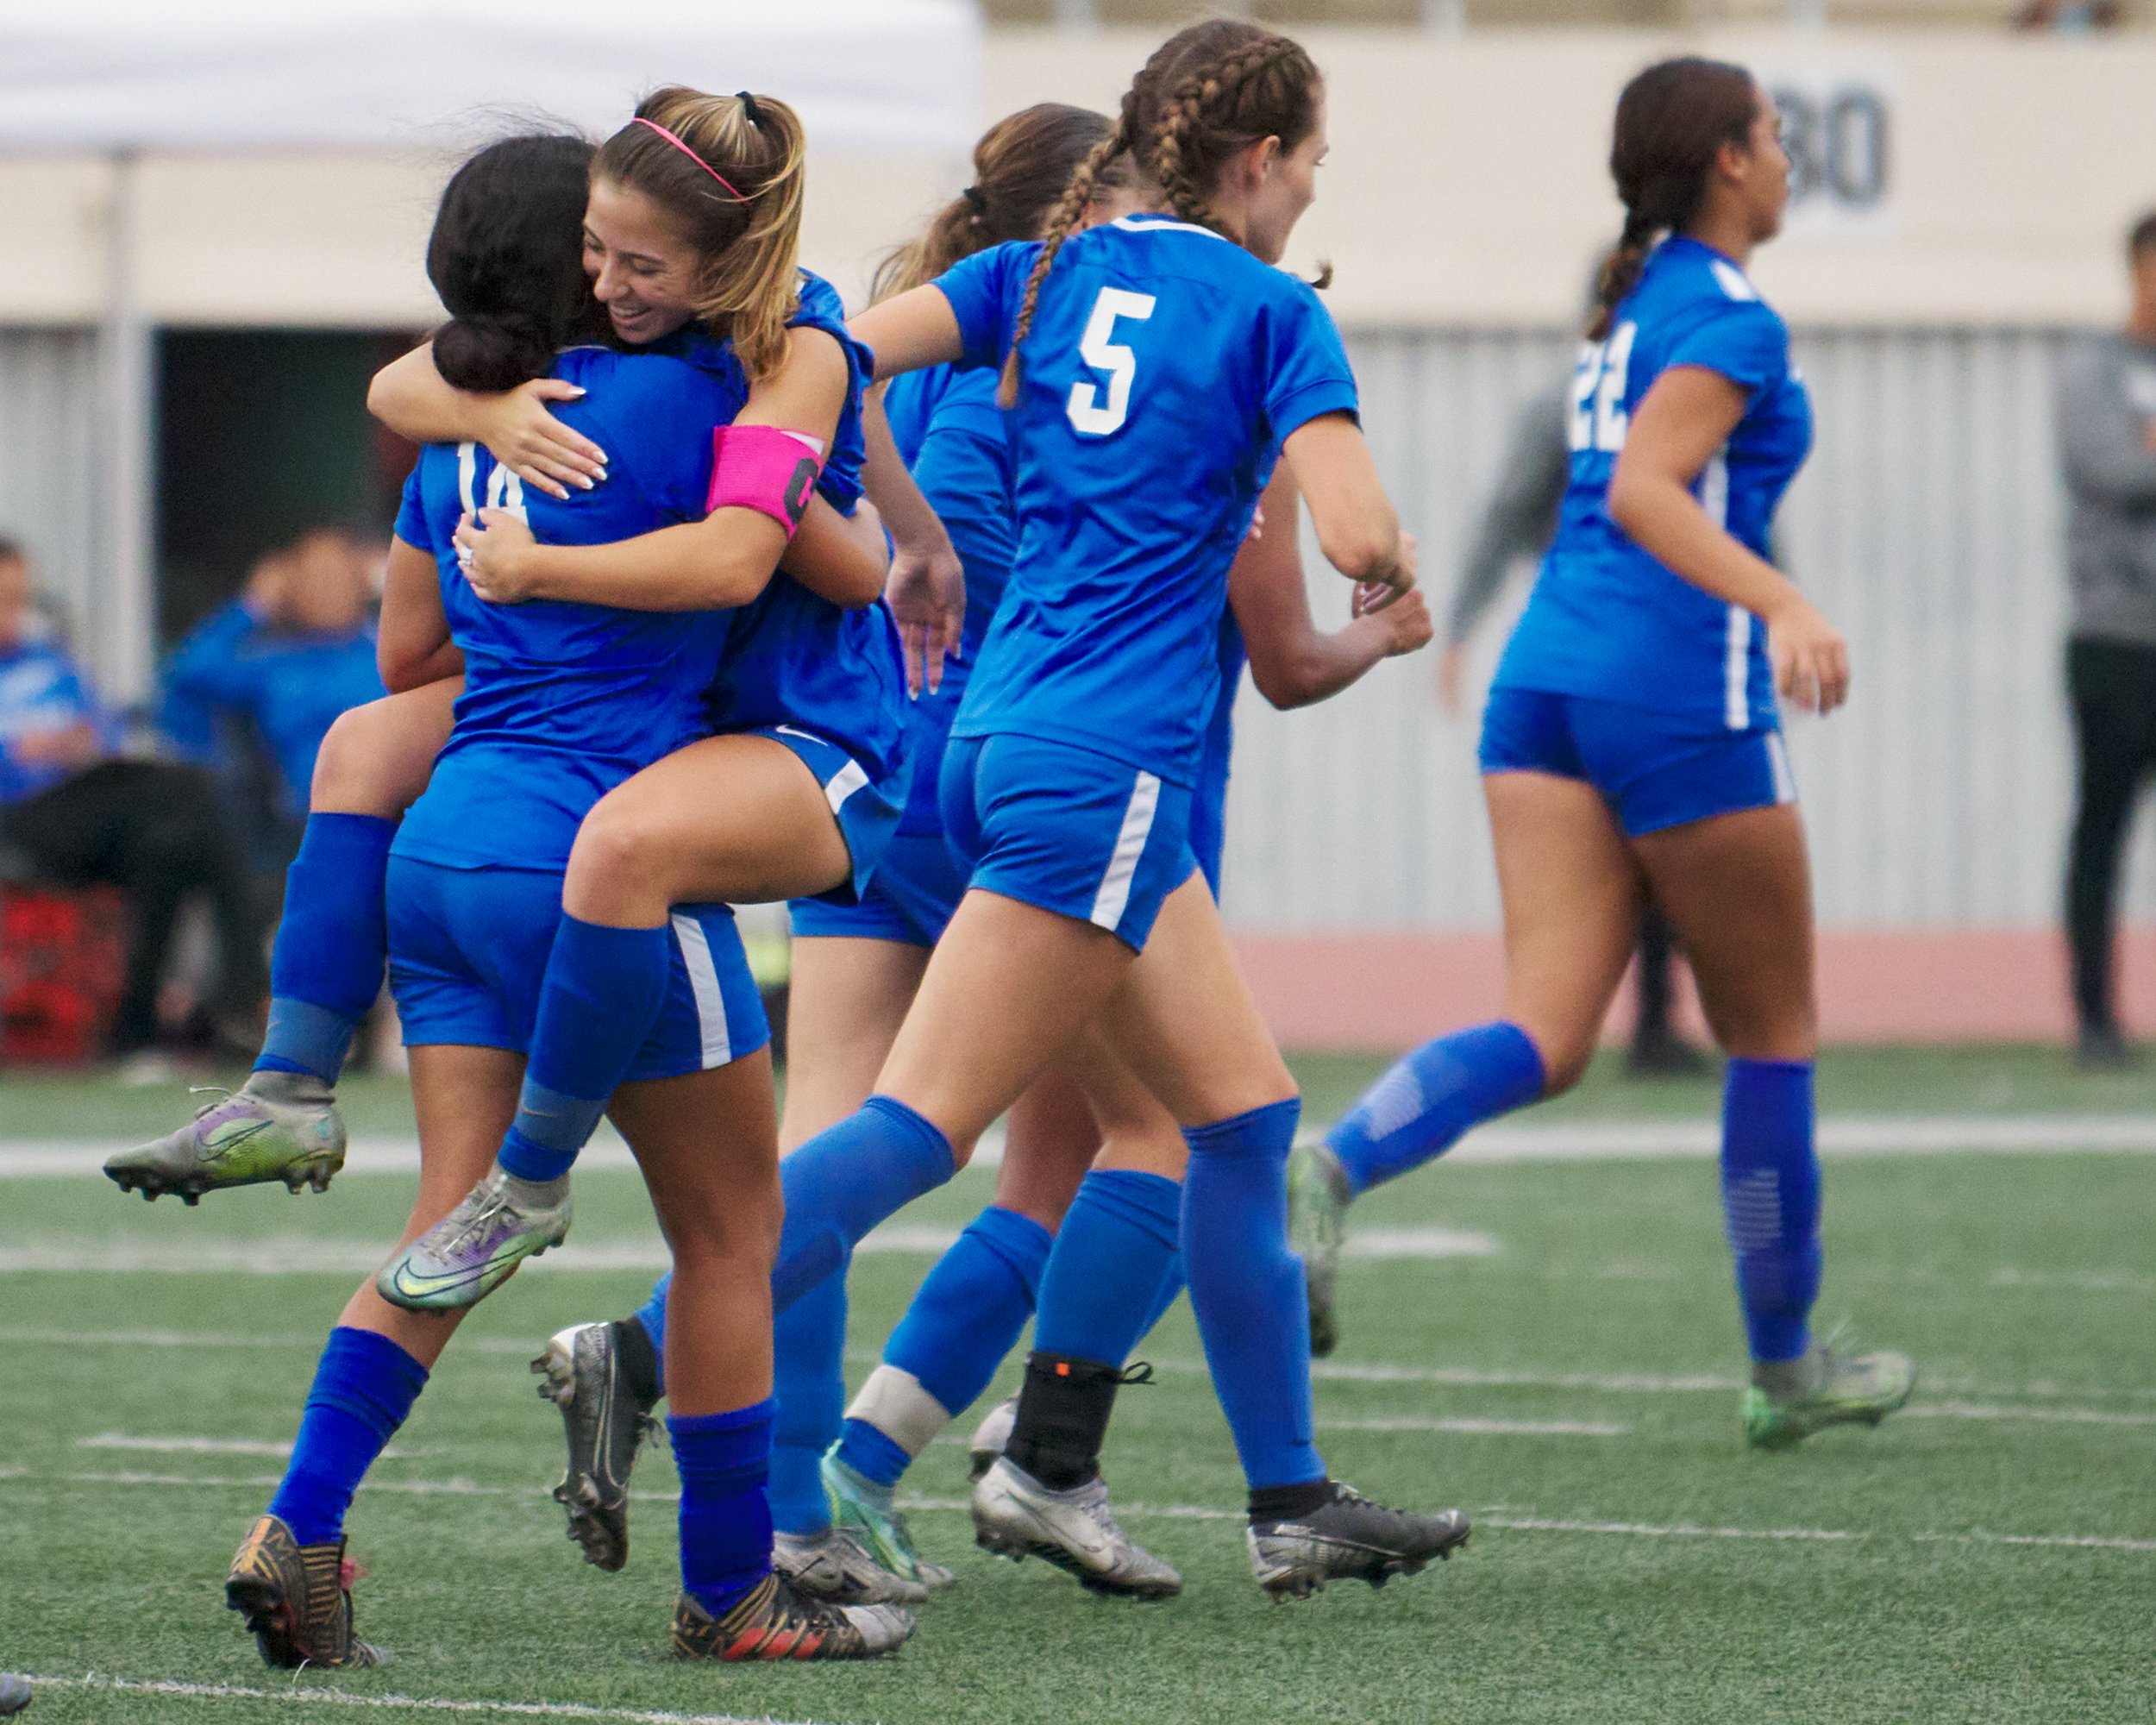  Santa Monica College Corsairs' Vashti Zuniga carries Sophie Doumitt after Doumitt scored the first goal of the game for the Corsairs during the women's soccer match against the Los Angeles Valley College Monarchs on Tuesday, Nov. 1, 2022, at Corsair